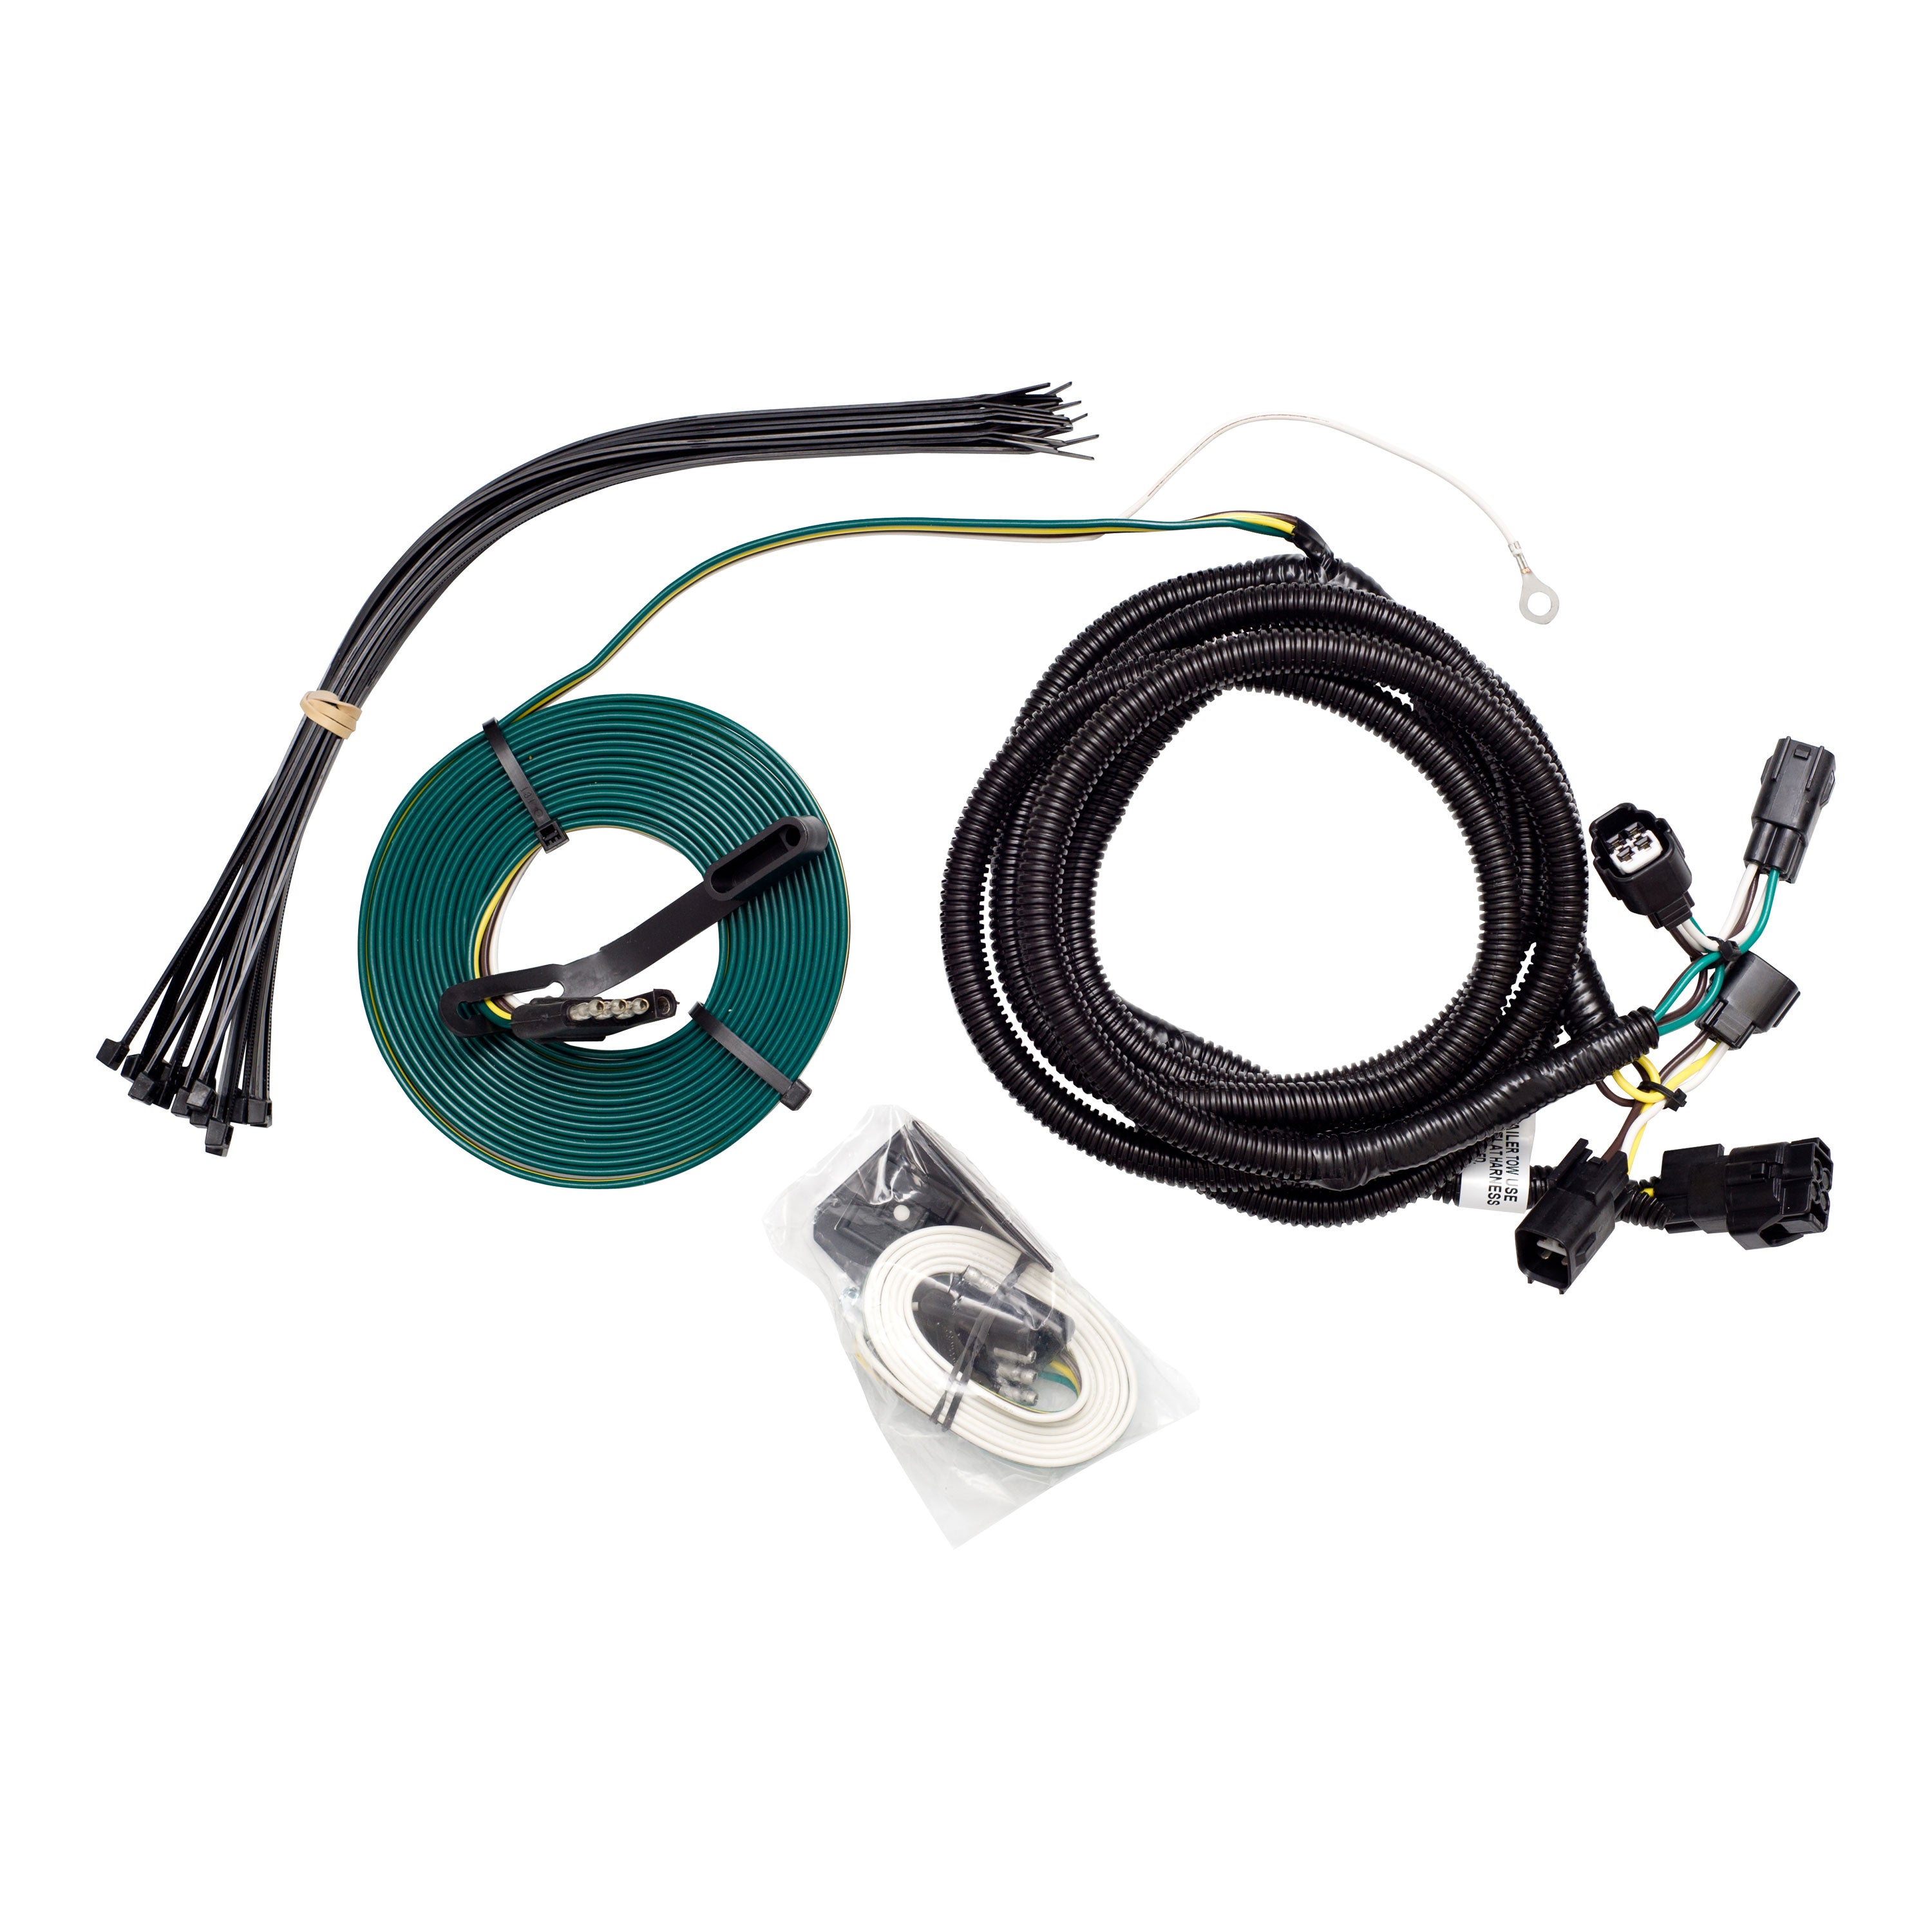 Demco 9526141 Towed Connector Vehicle Wiring Kit for Buick Enclave '08-'12